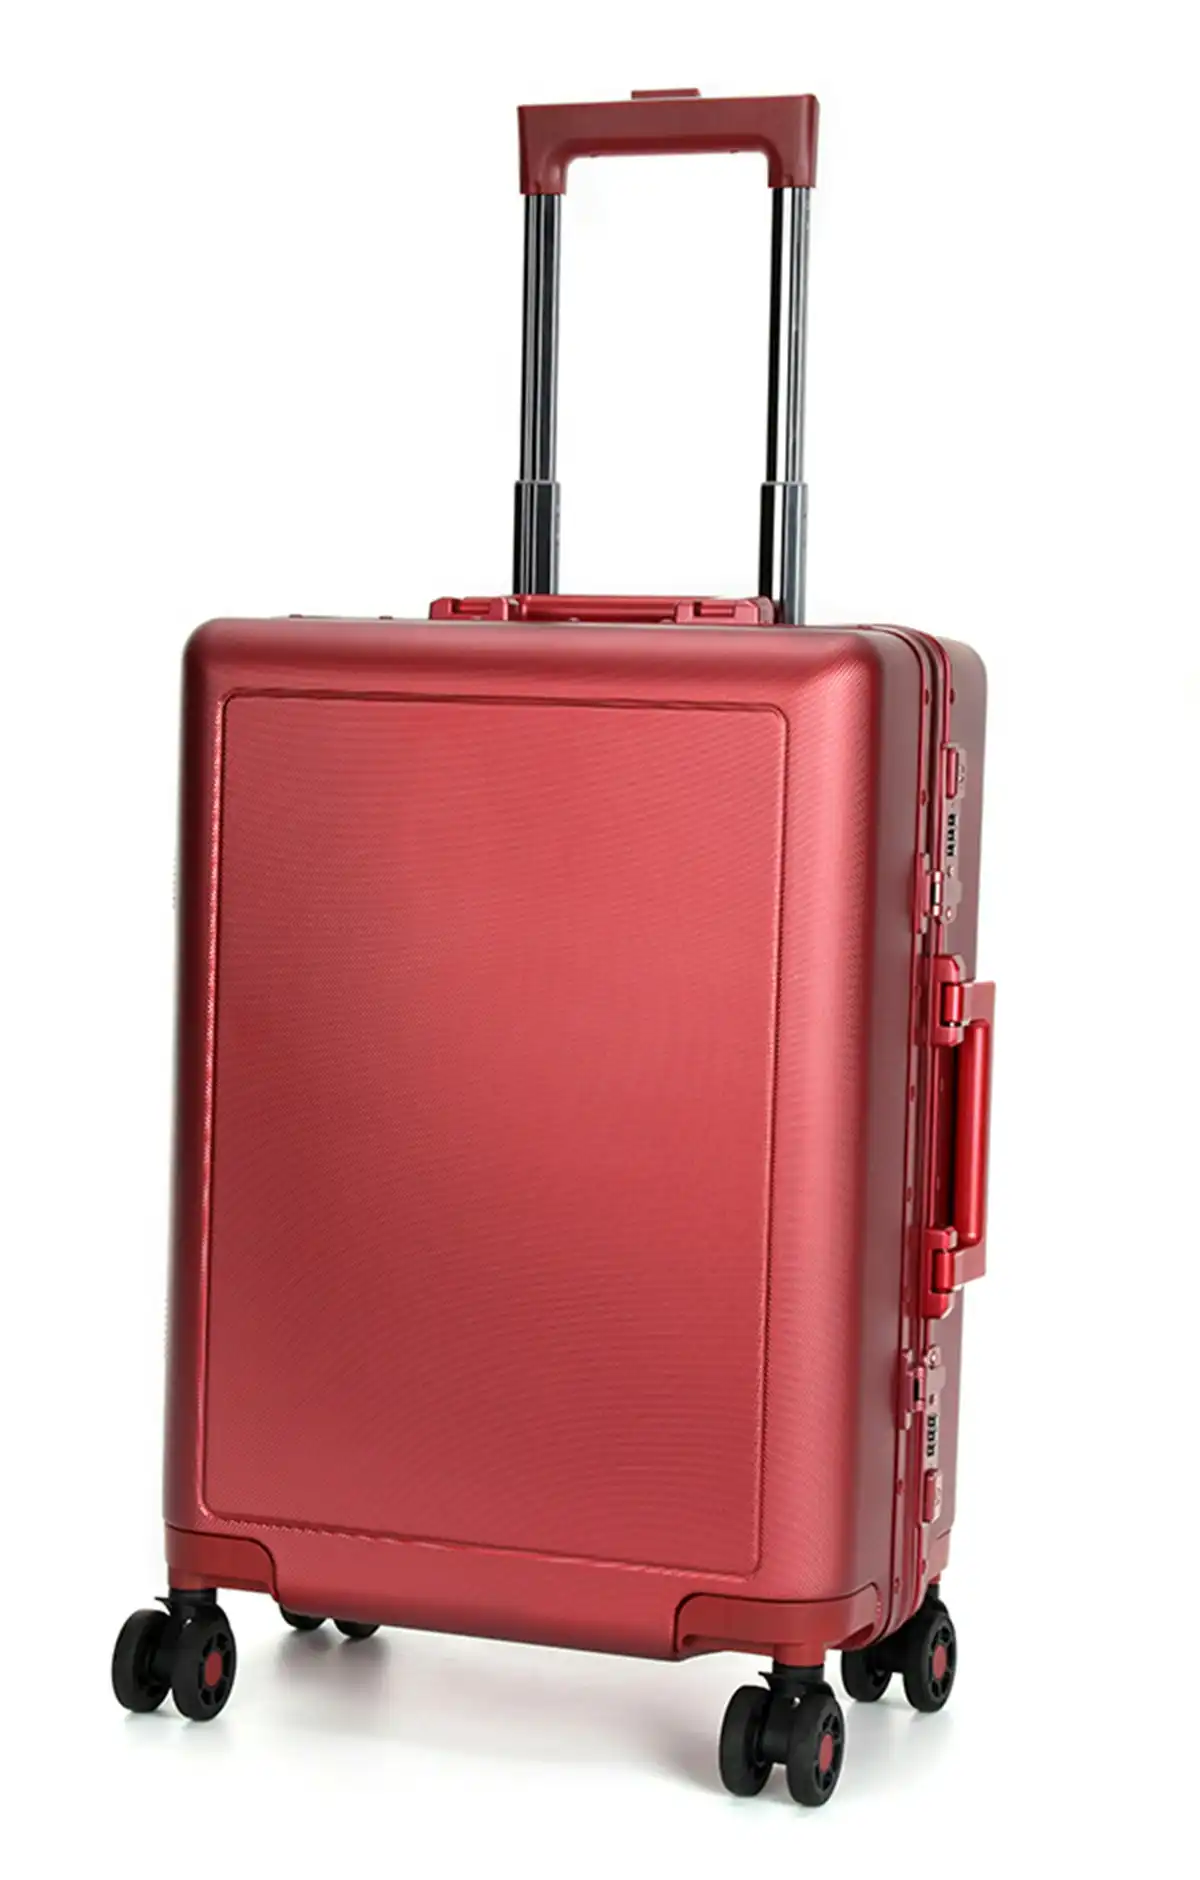 Suissewin Swiss Aluminium Luggage Suitcase Lightweight With TSA Locker 8 Wheels Carry on Hardcase SN7613A Red